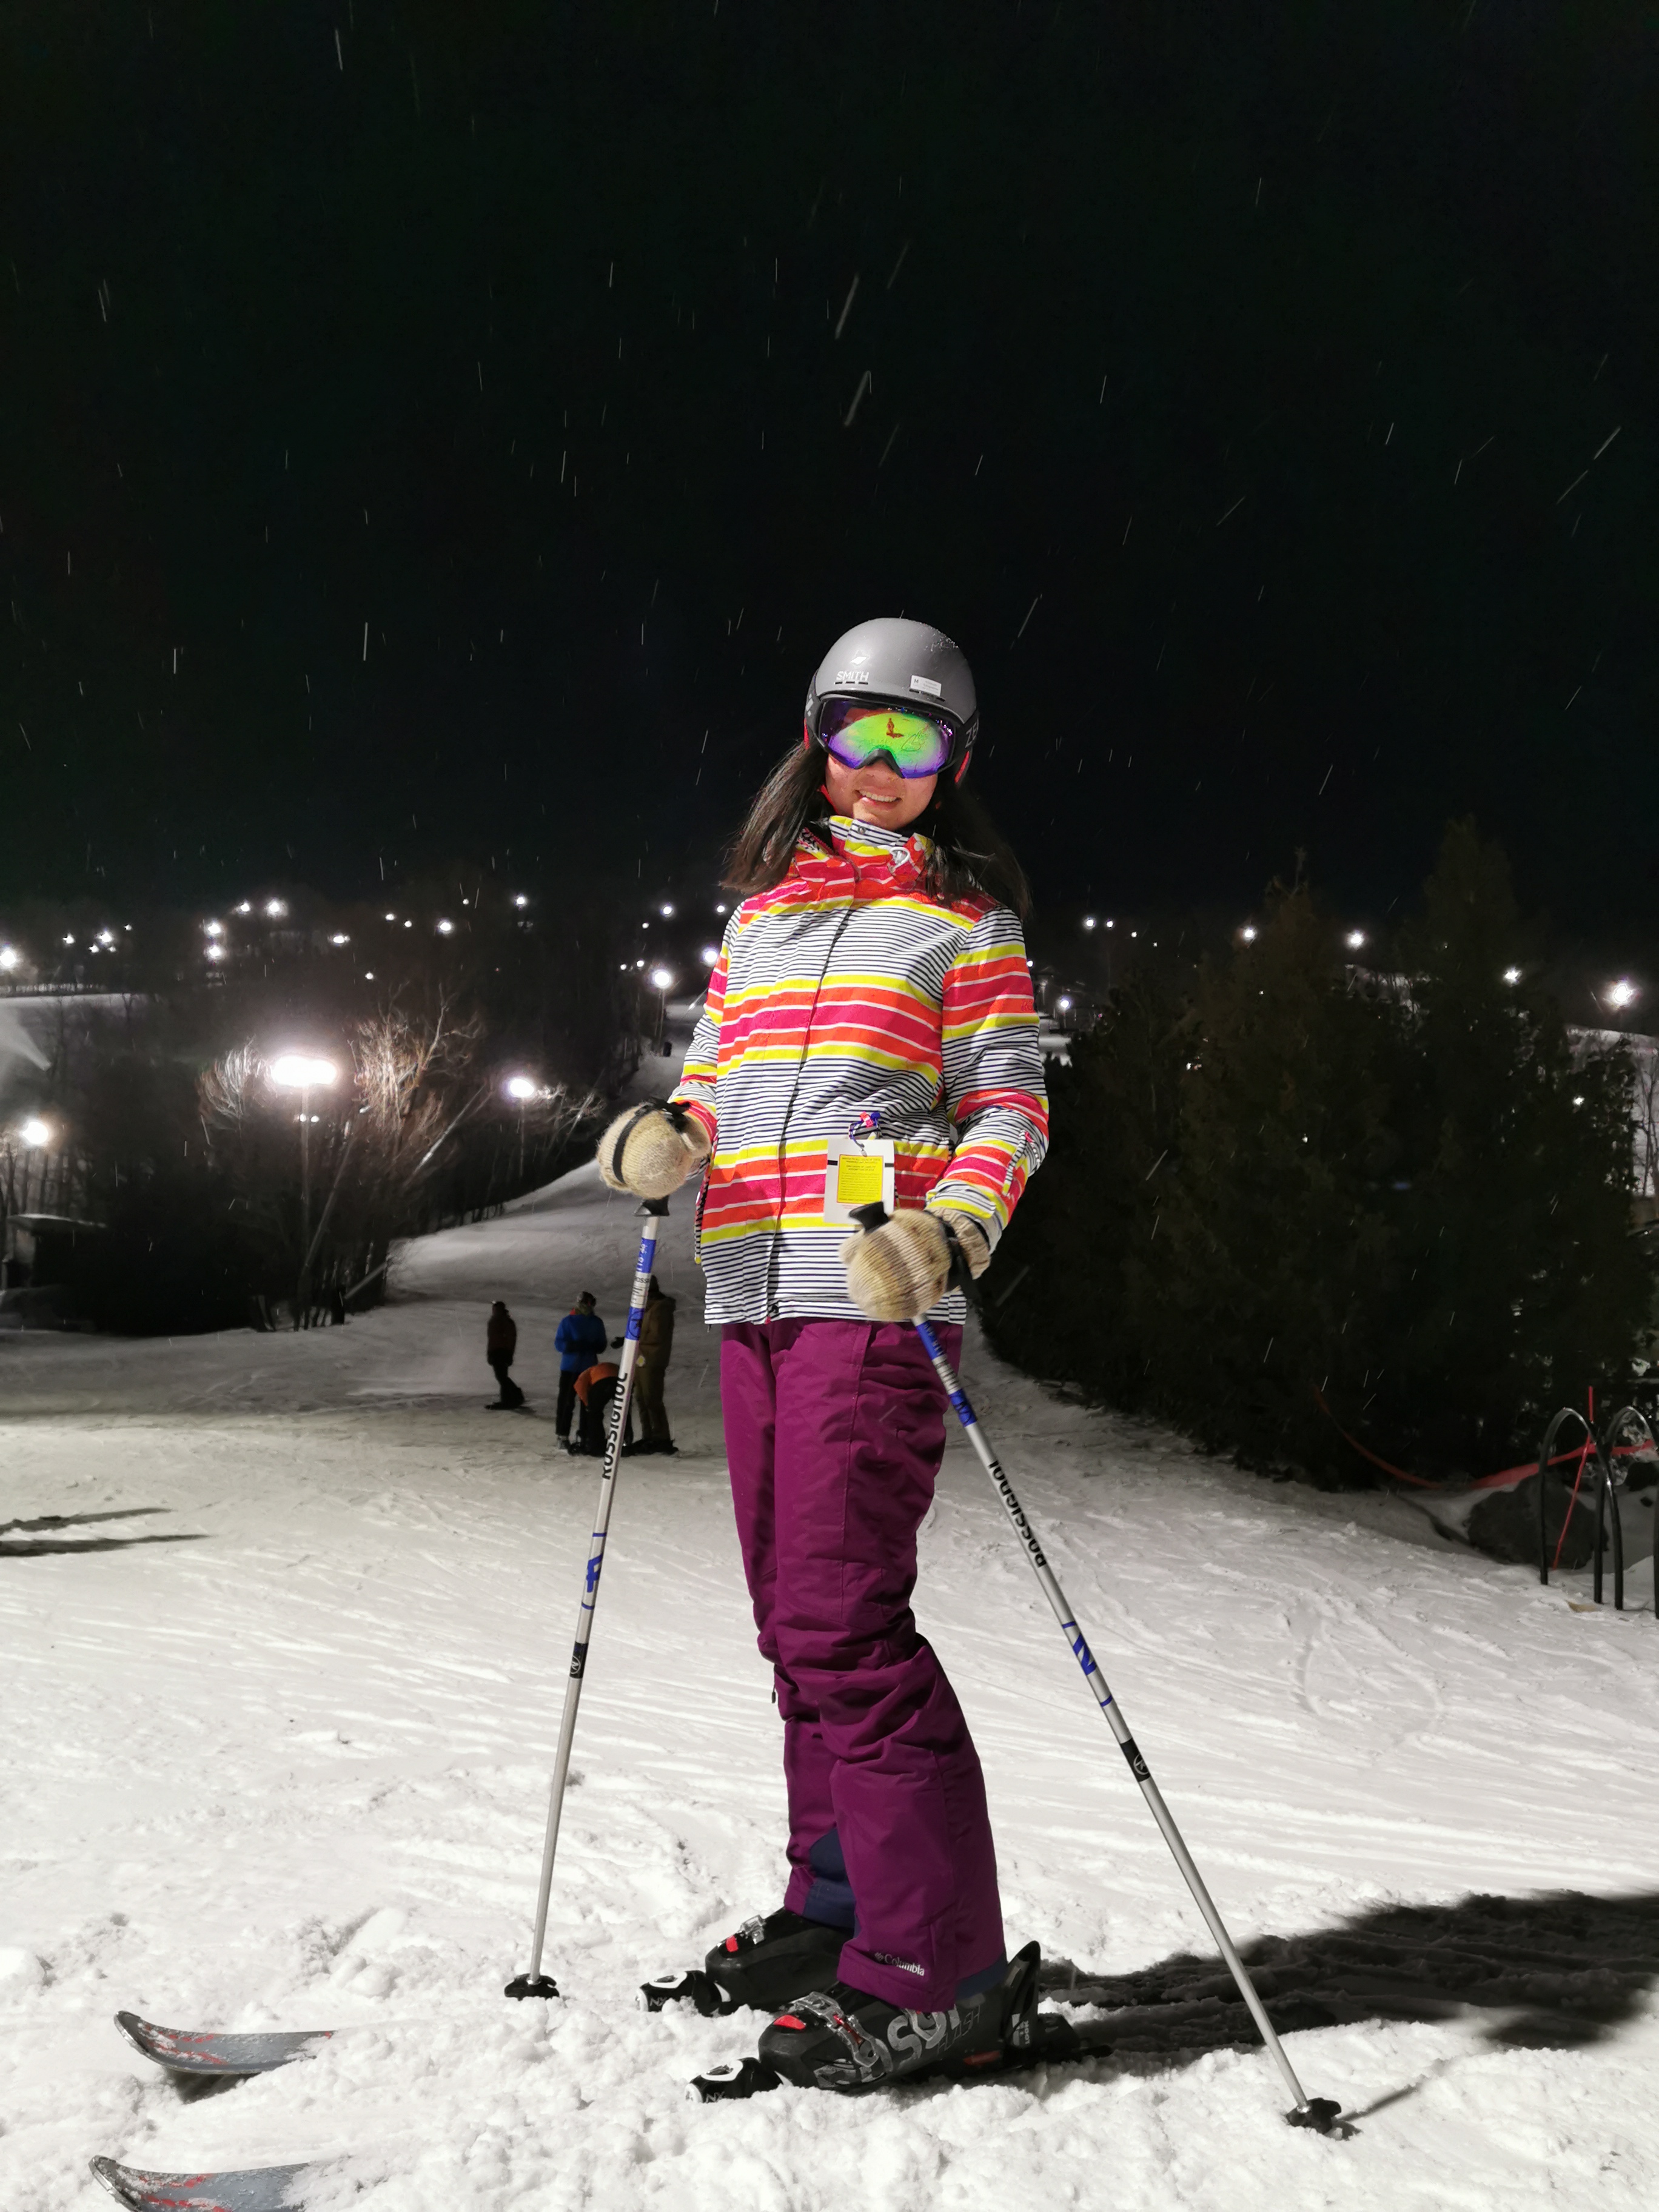 A photo of me skiing